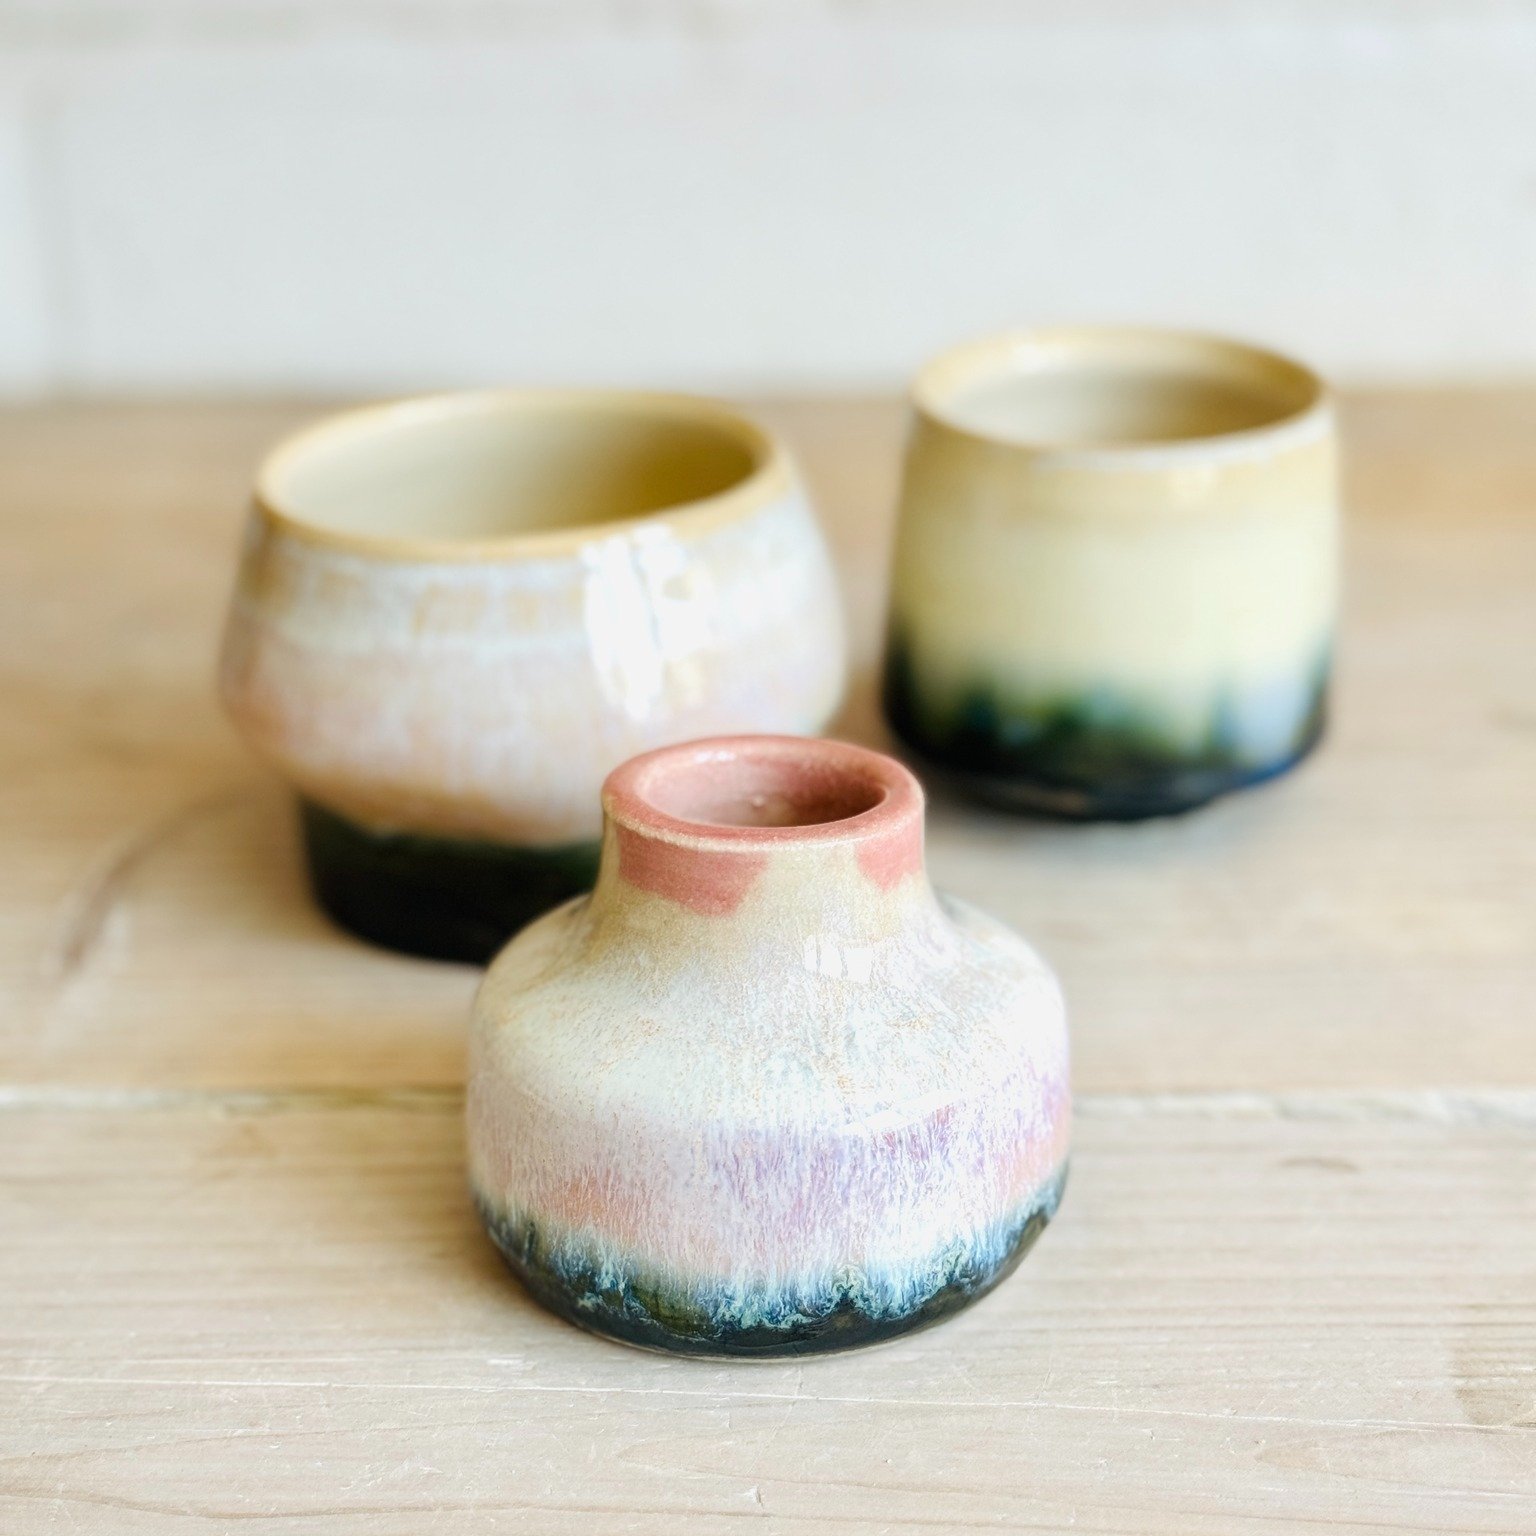 Have you ever heard of reactive glazes? If not, here's a little pottery fact to spike your curiosity. 

Reactive glaze is a single glaze that creates a spectrum of tones, adding depth.  Such glazes are composed of different raw materials, some of whi